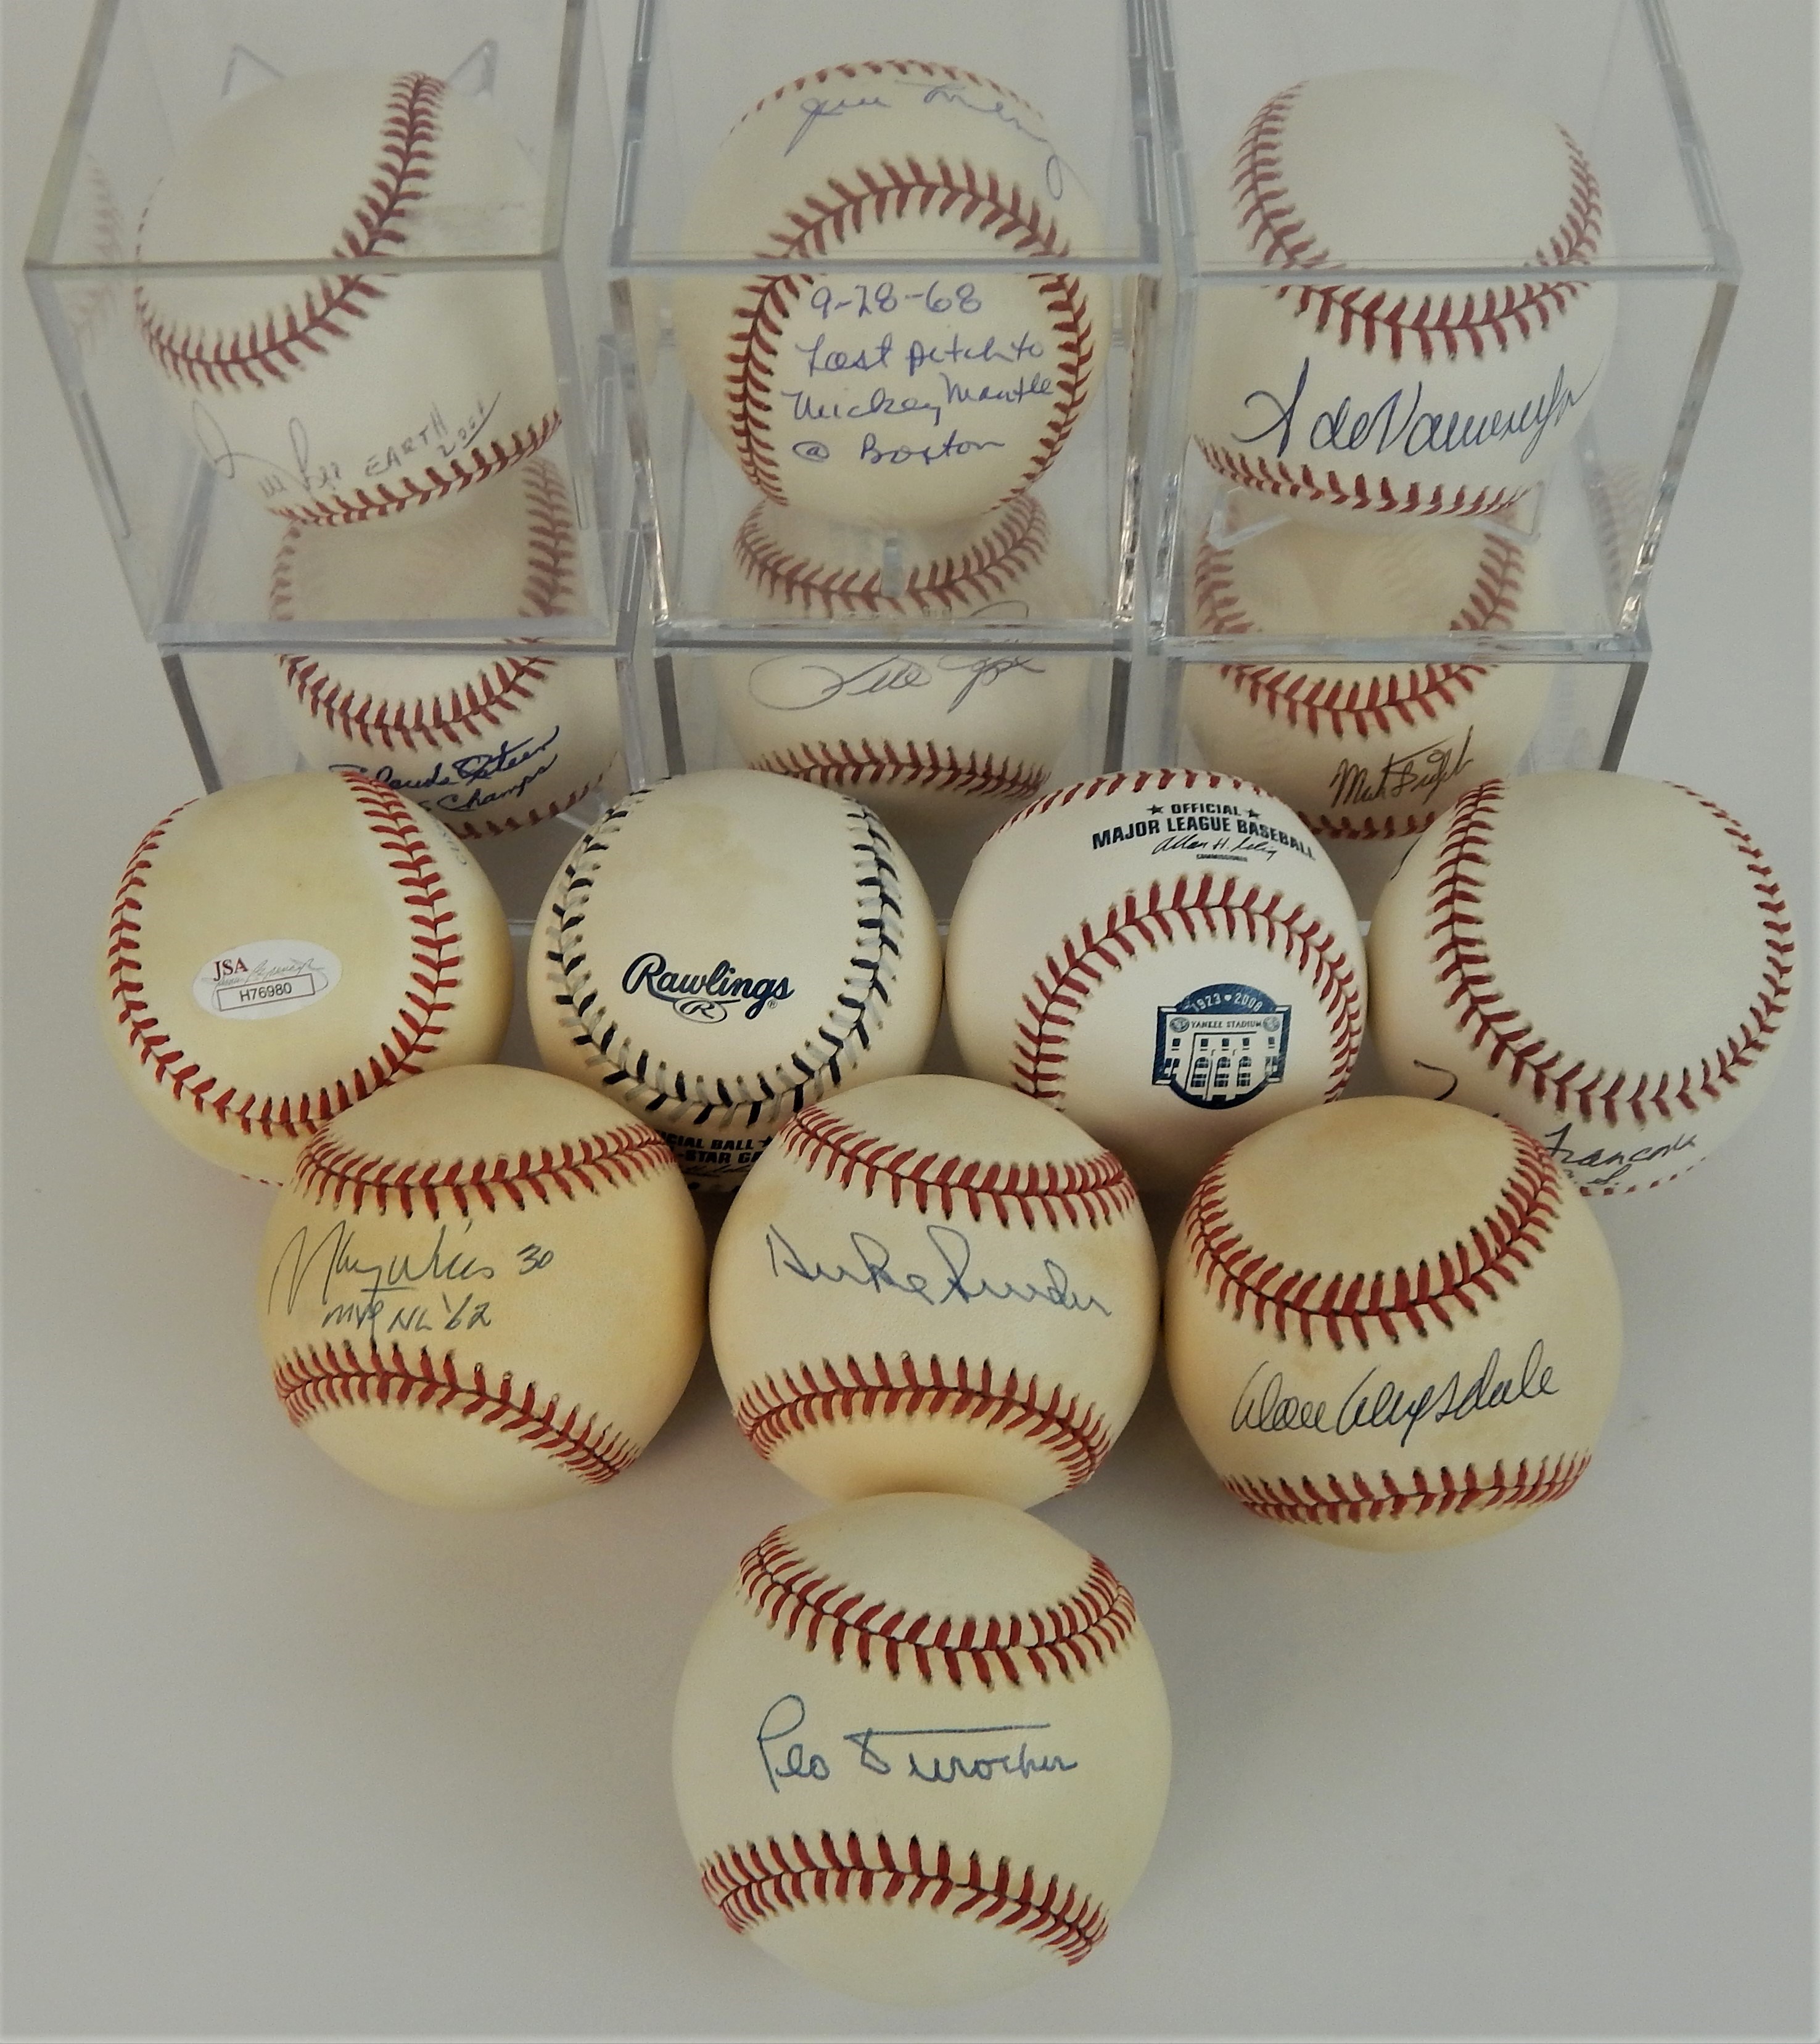 Signed Baseball Collection featuring Drysdale, Snider, Durocher etc. (12)